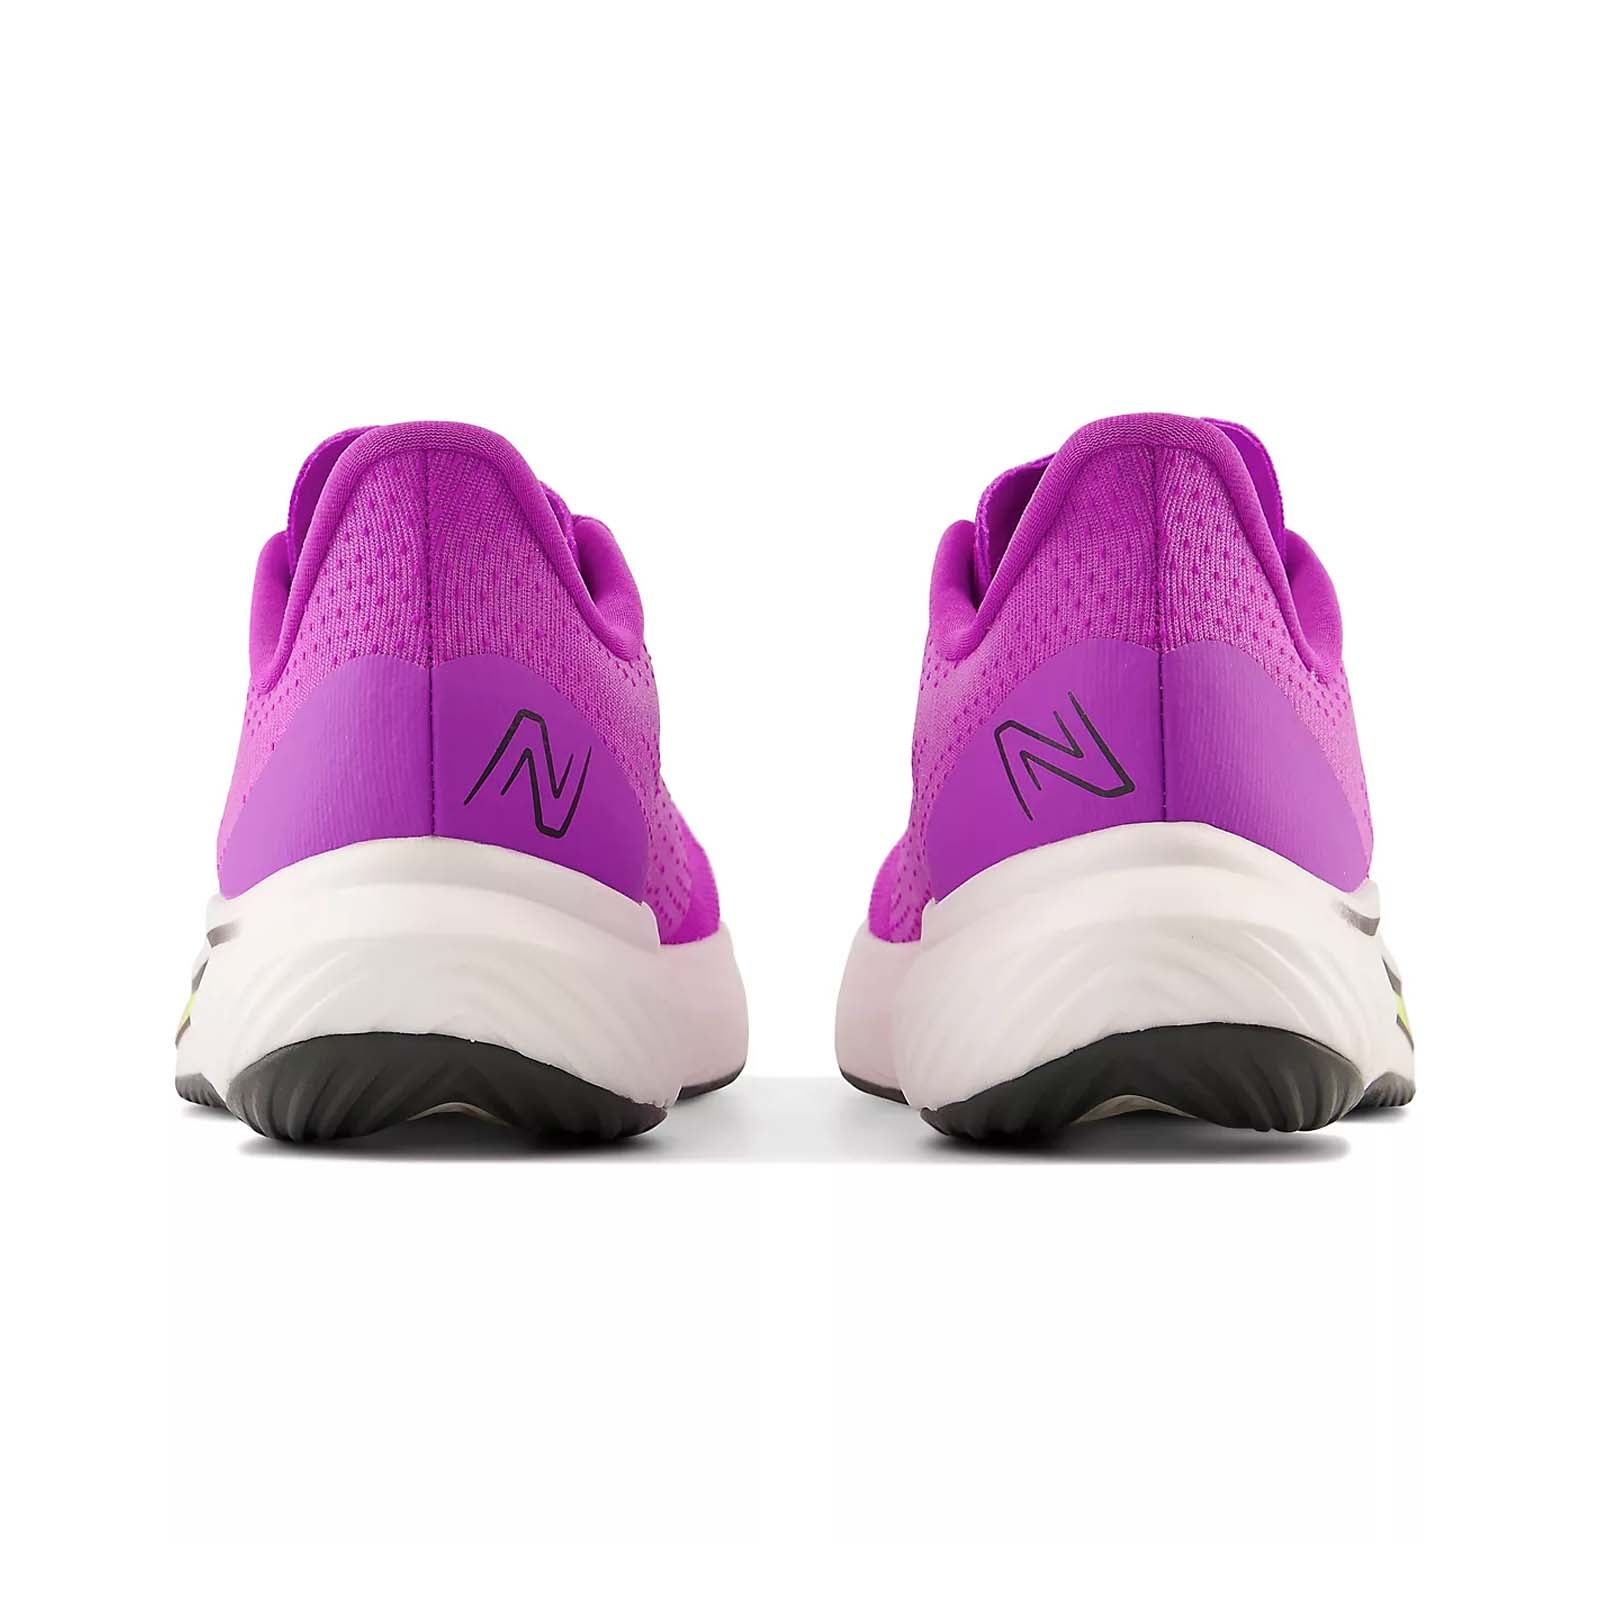 New Balance FuelCell Rebel V3 Womens Running Trainer